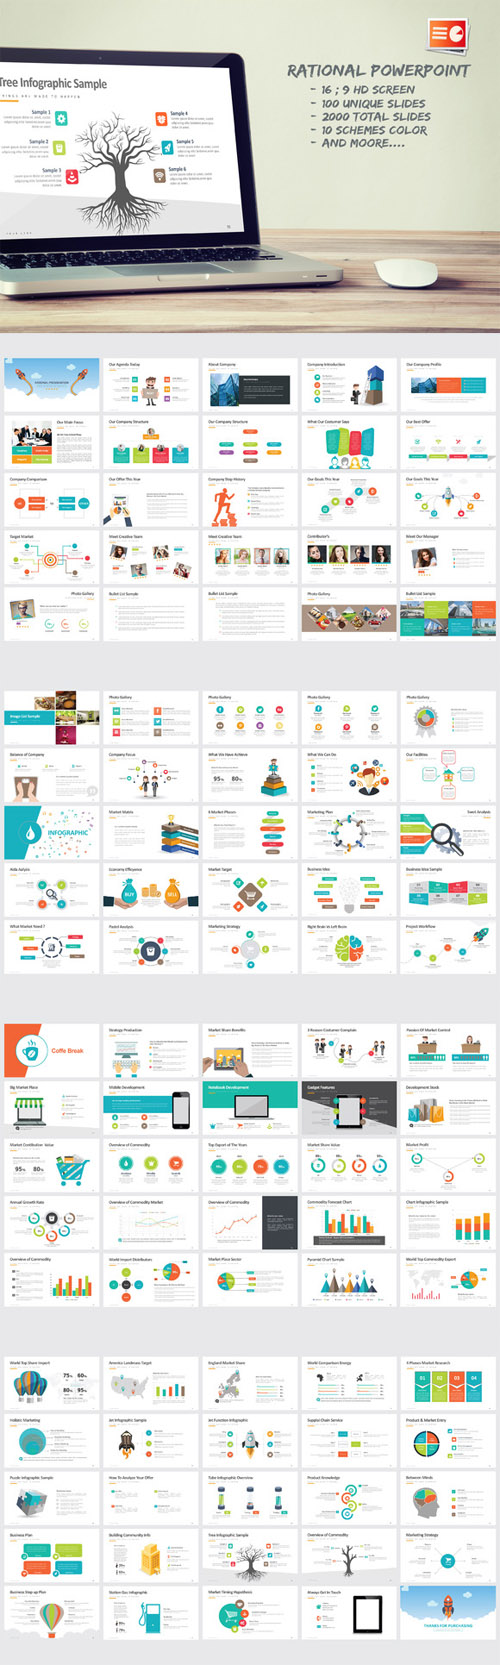 CM - Rational Powerpoint Template 358663